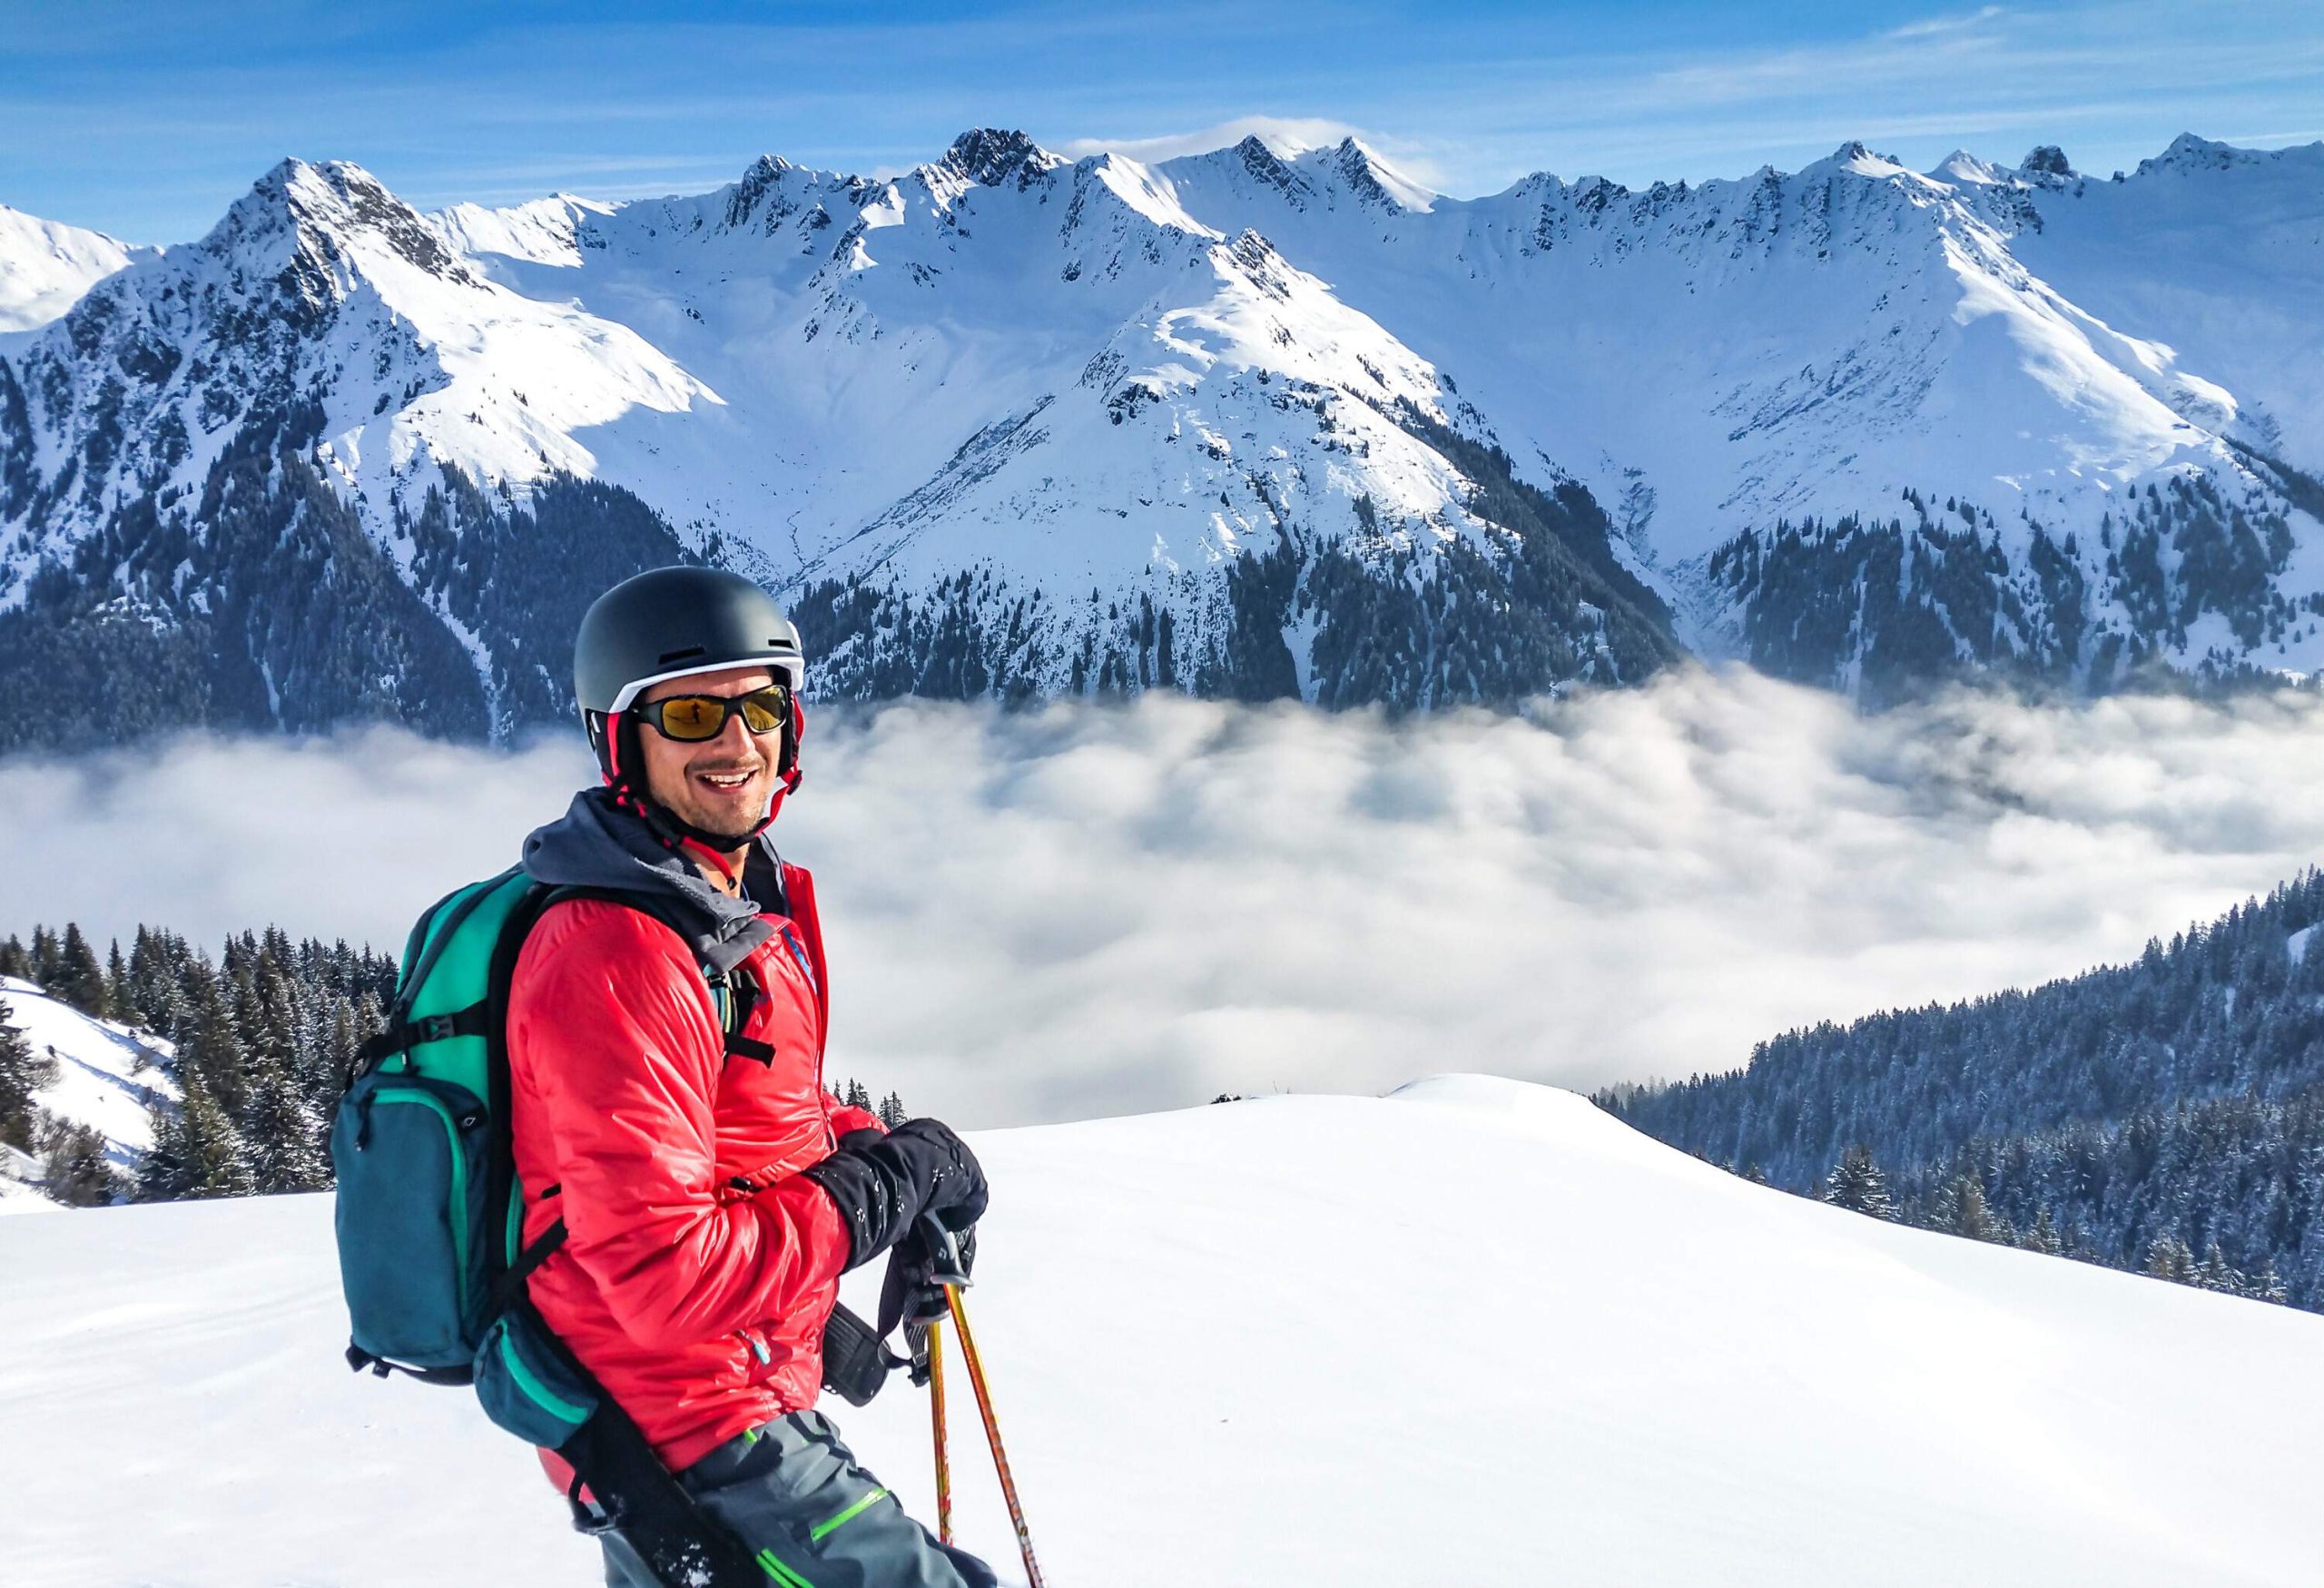 A smiling skier with a red jacket and helmet stands on a snowy hilltop against a background of thick fog at the foot of snow-covered mountains.